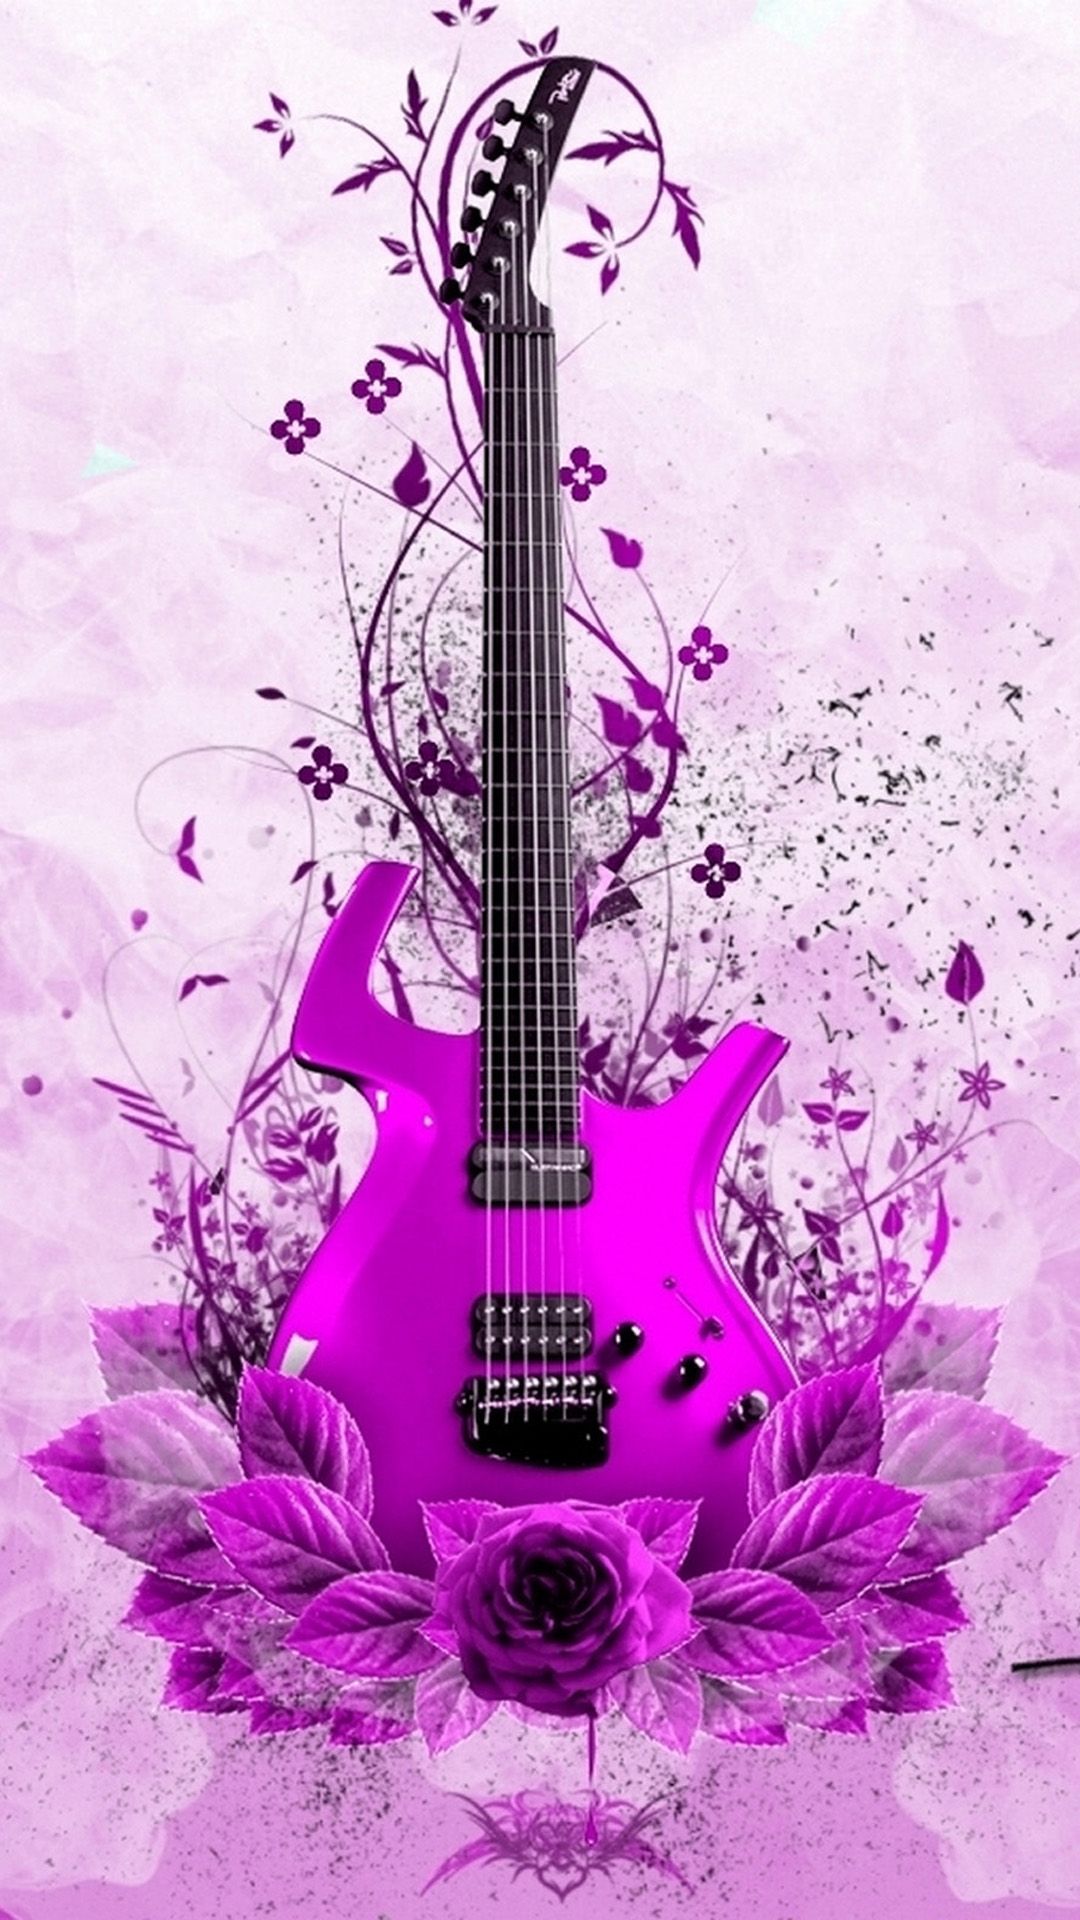 Abstract Music Guitar Instrument #iPhone #plus #wallpaper. Pink guitar wallpaper, iPhone 6 plus wallpaper, Music wallpaper